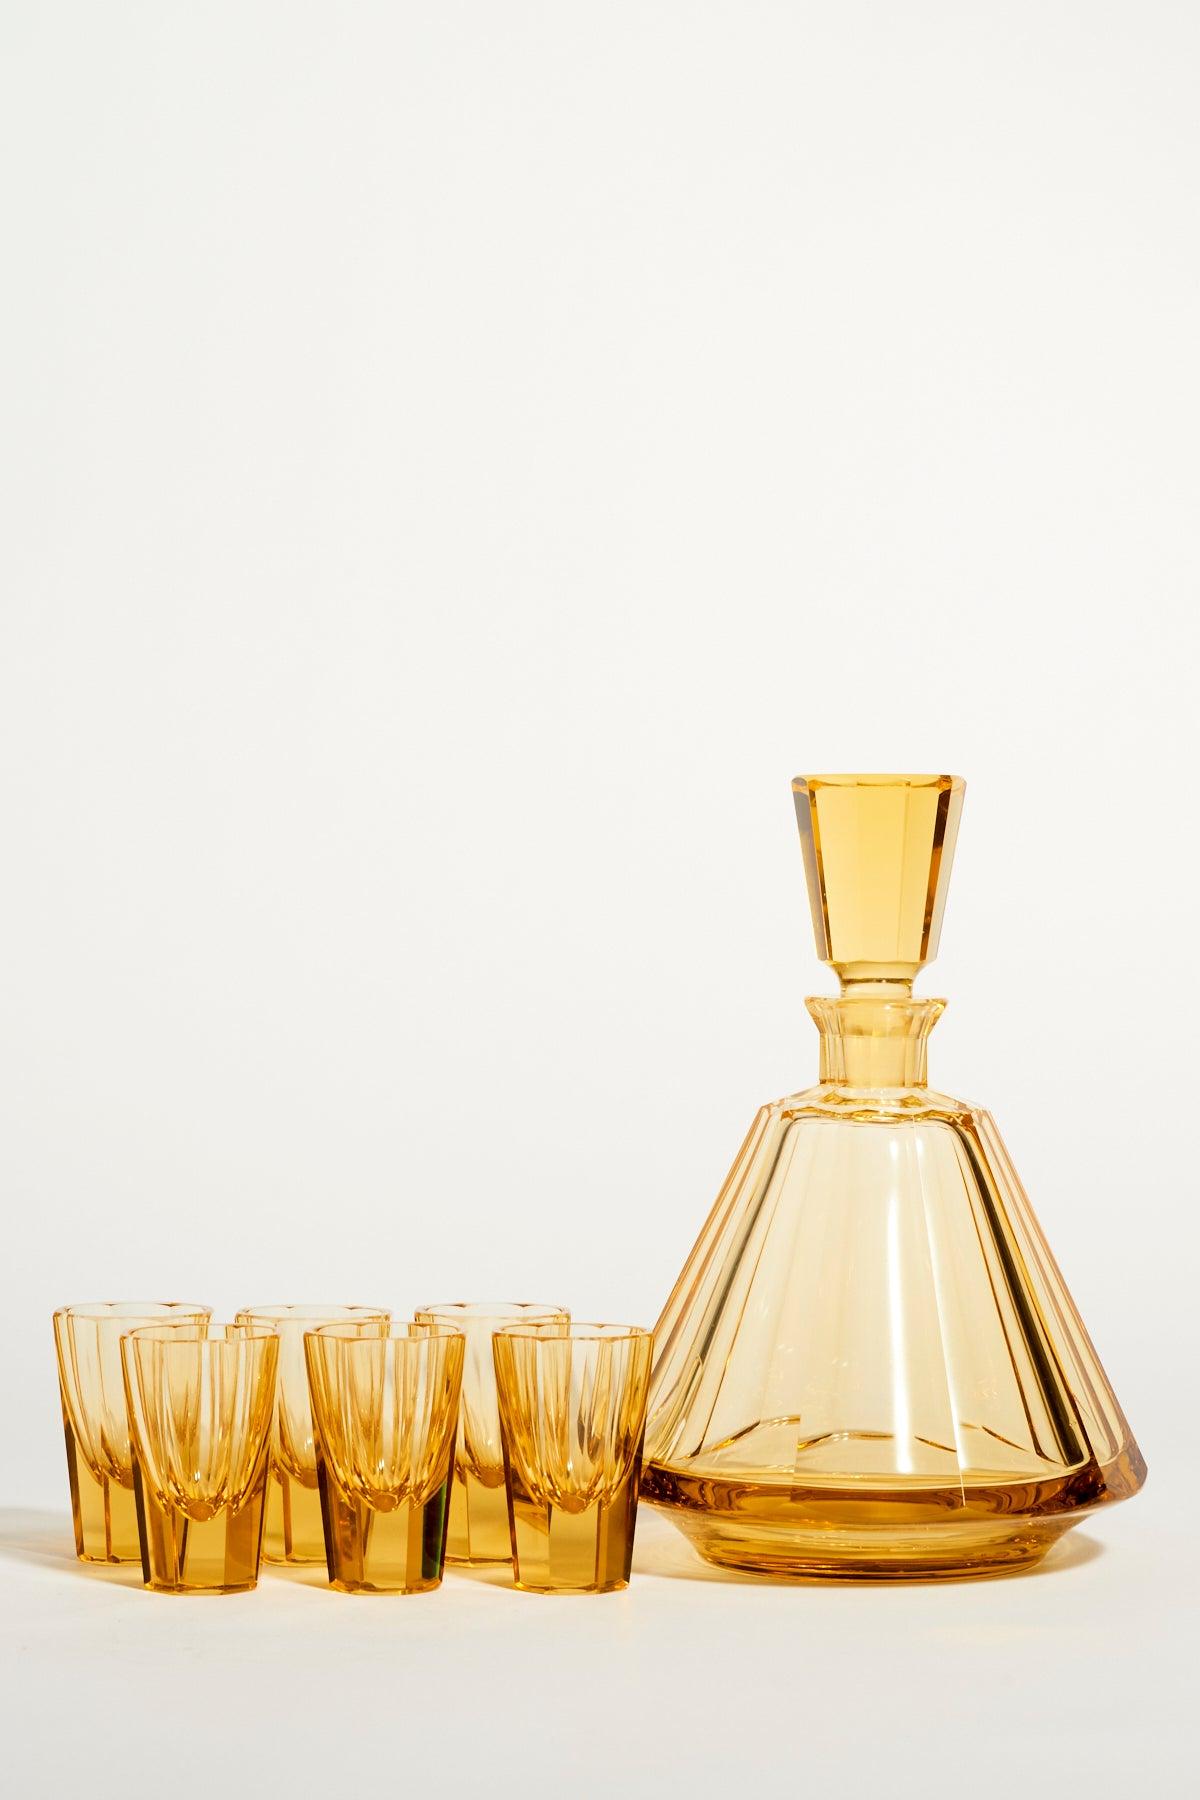 Czech faceted glass decanter set in amber yellow tones.